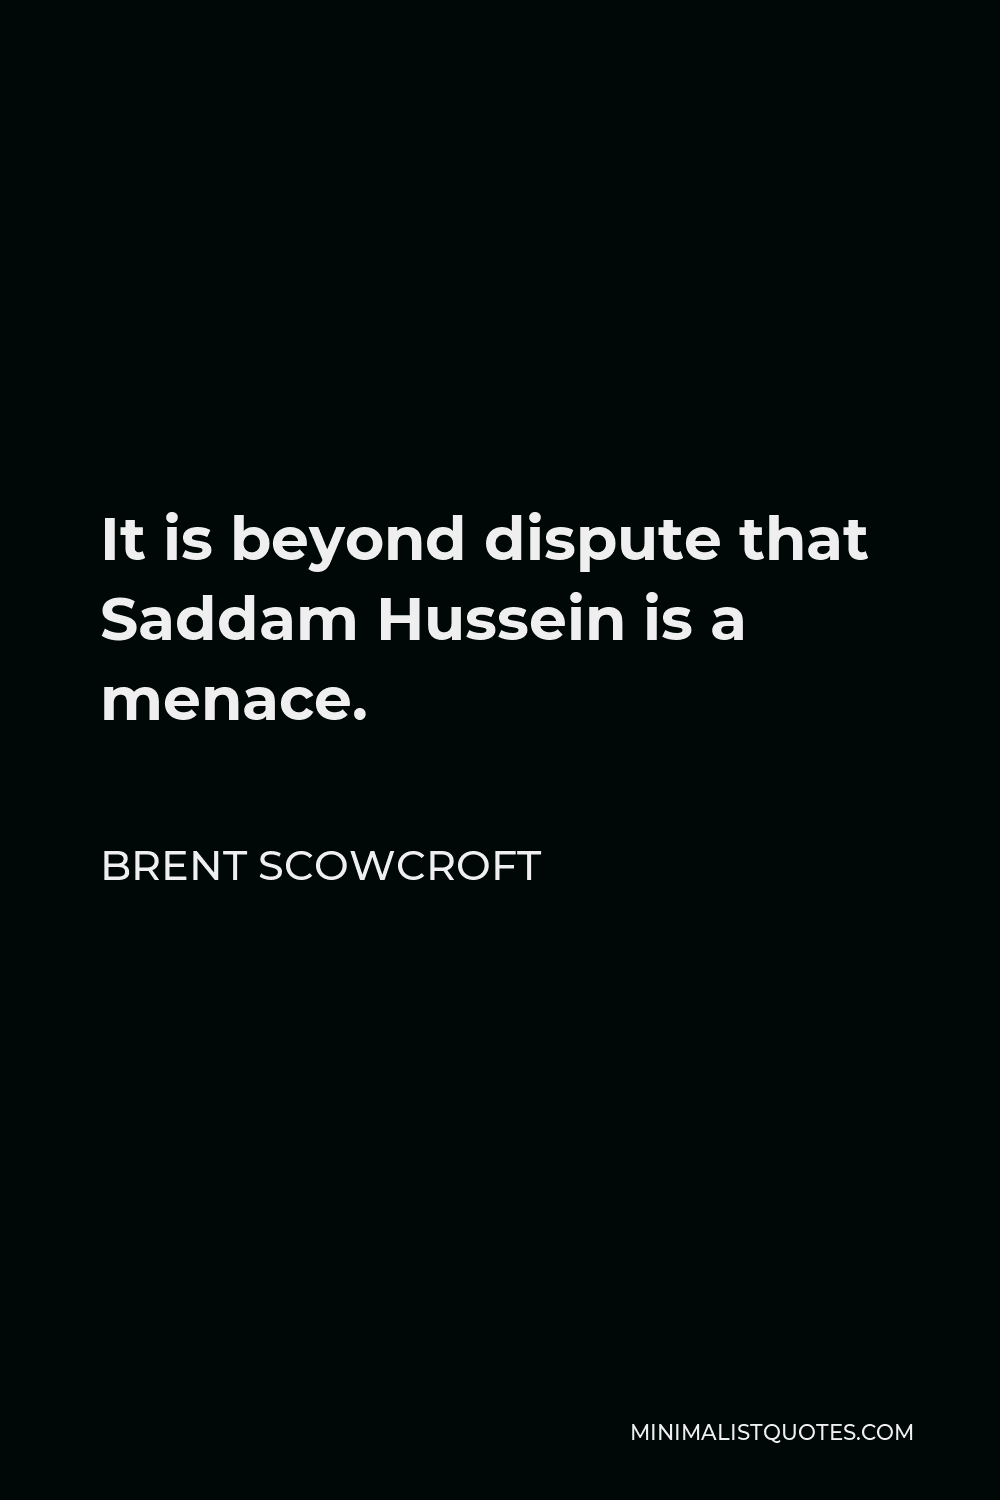 Brent Scowcroft Quote - It is beyond dispute that Saddam Hussein is a menace.